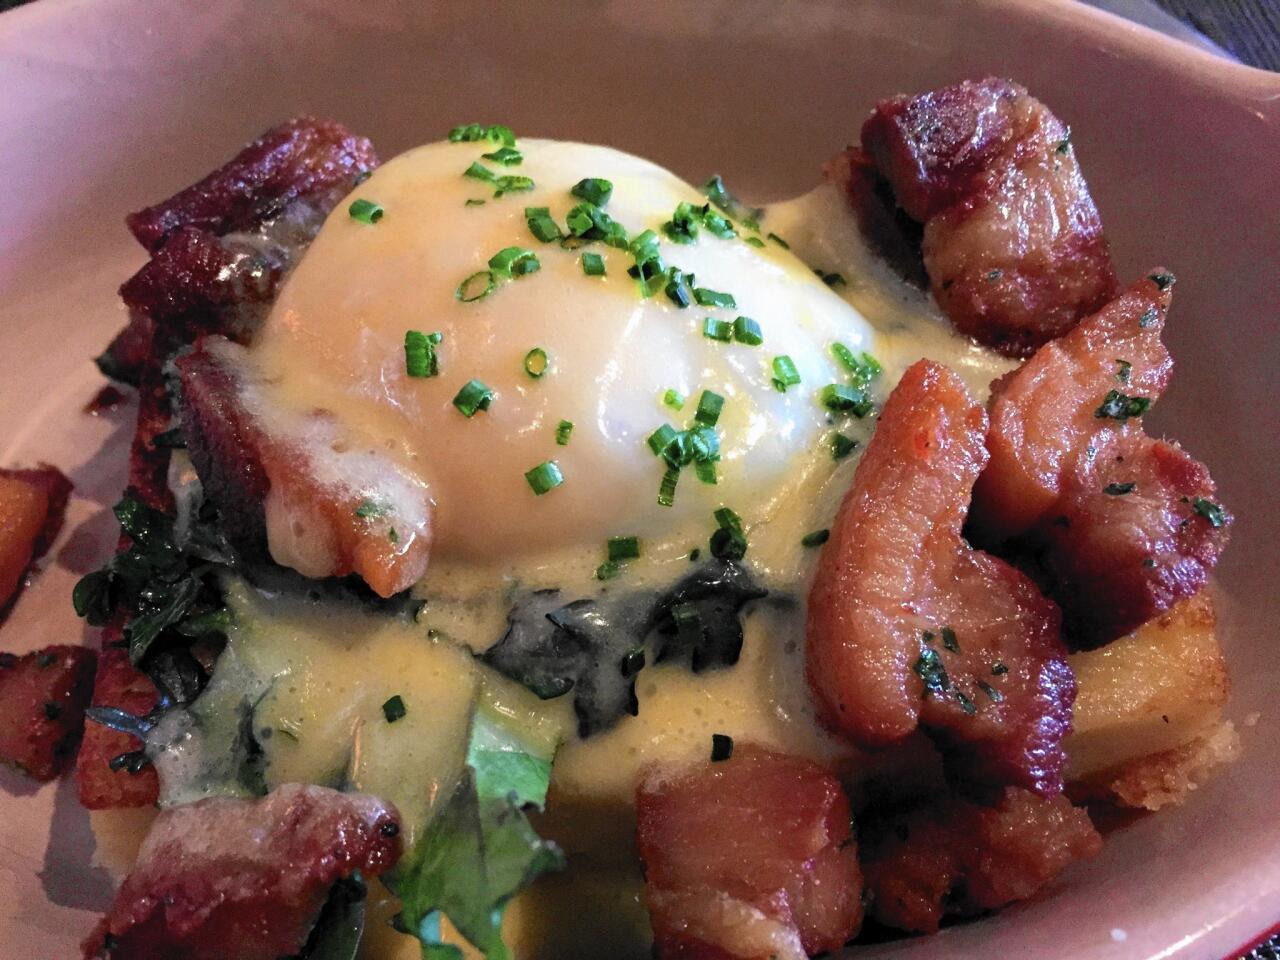 The Mac Attack, chef Jeremiah Bacon's creative Lowcountry take on classic Eggs Benedict, is garnished with pork belly at The Macintosh.